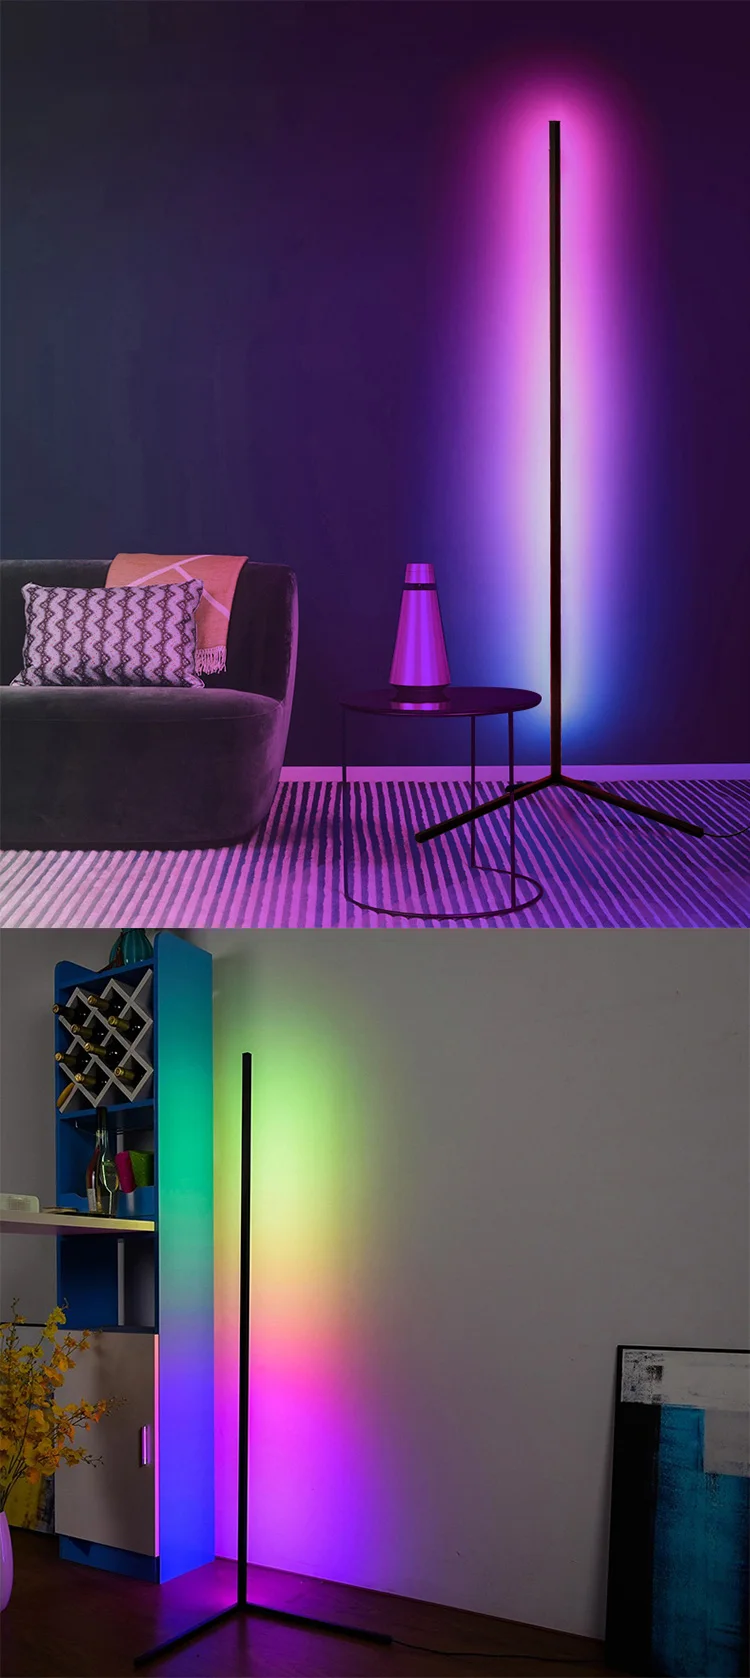 Dropshipping Nordic Modern Decorative 140cm Remote Controlled LED Light RGB Tripod Corner Floor Lamp For Living Room